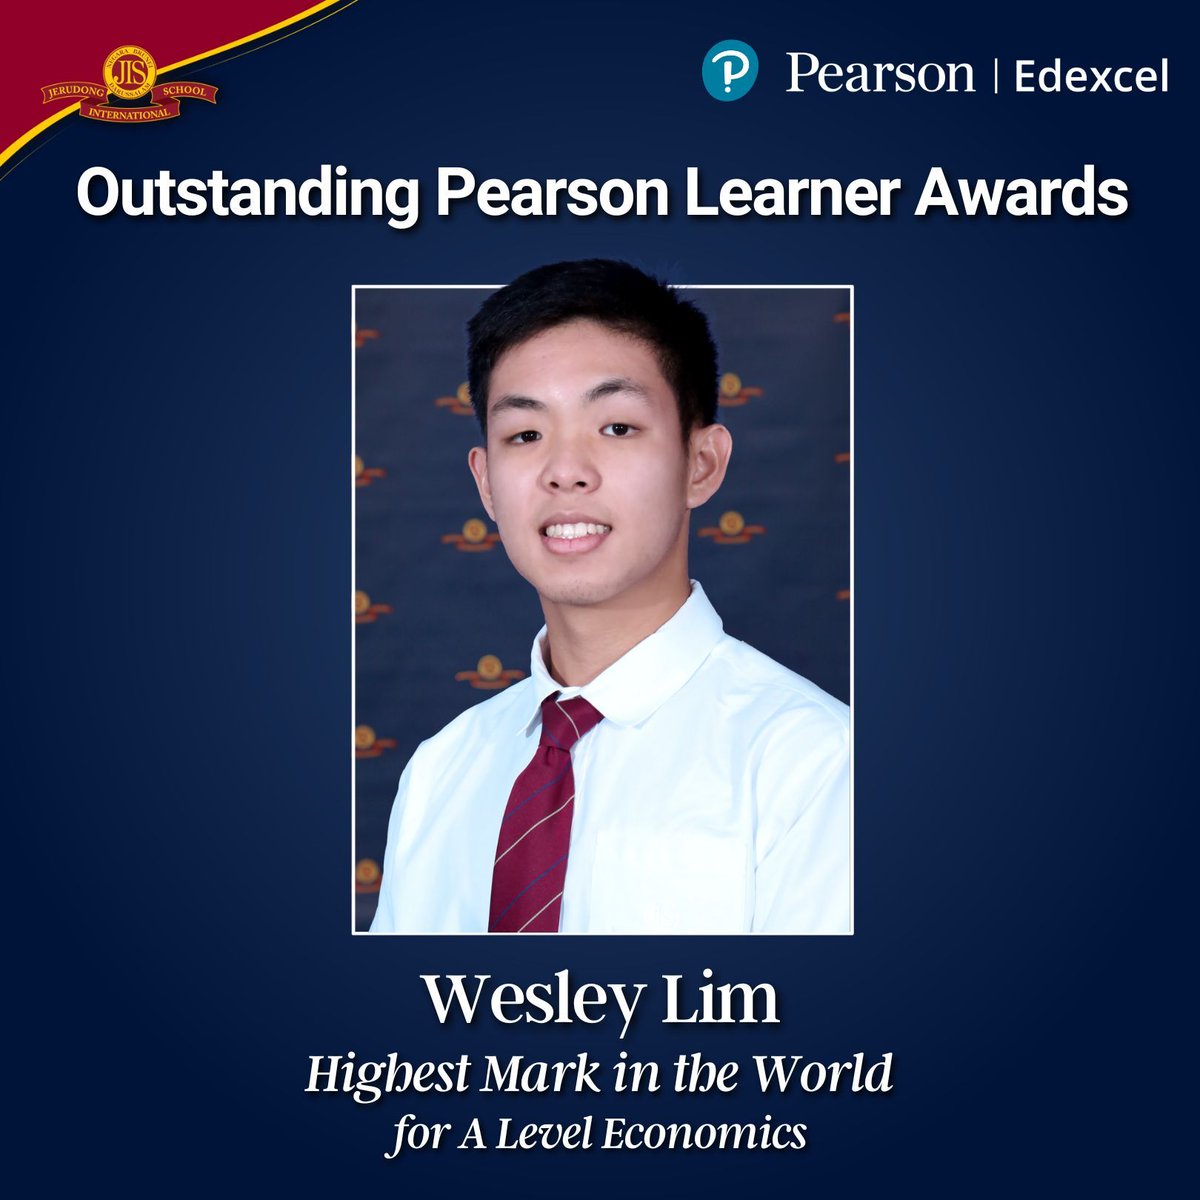 Congratulations to Wesley Lim for attaining the Highest Mark in the World for his #Pearson Edexcel International A Level in Economics. Well done! #OutstandingPearsonLearnerAwards #ALevelResults #JerudongInternationalSchool #JISBrunei